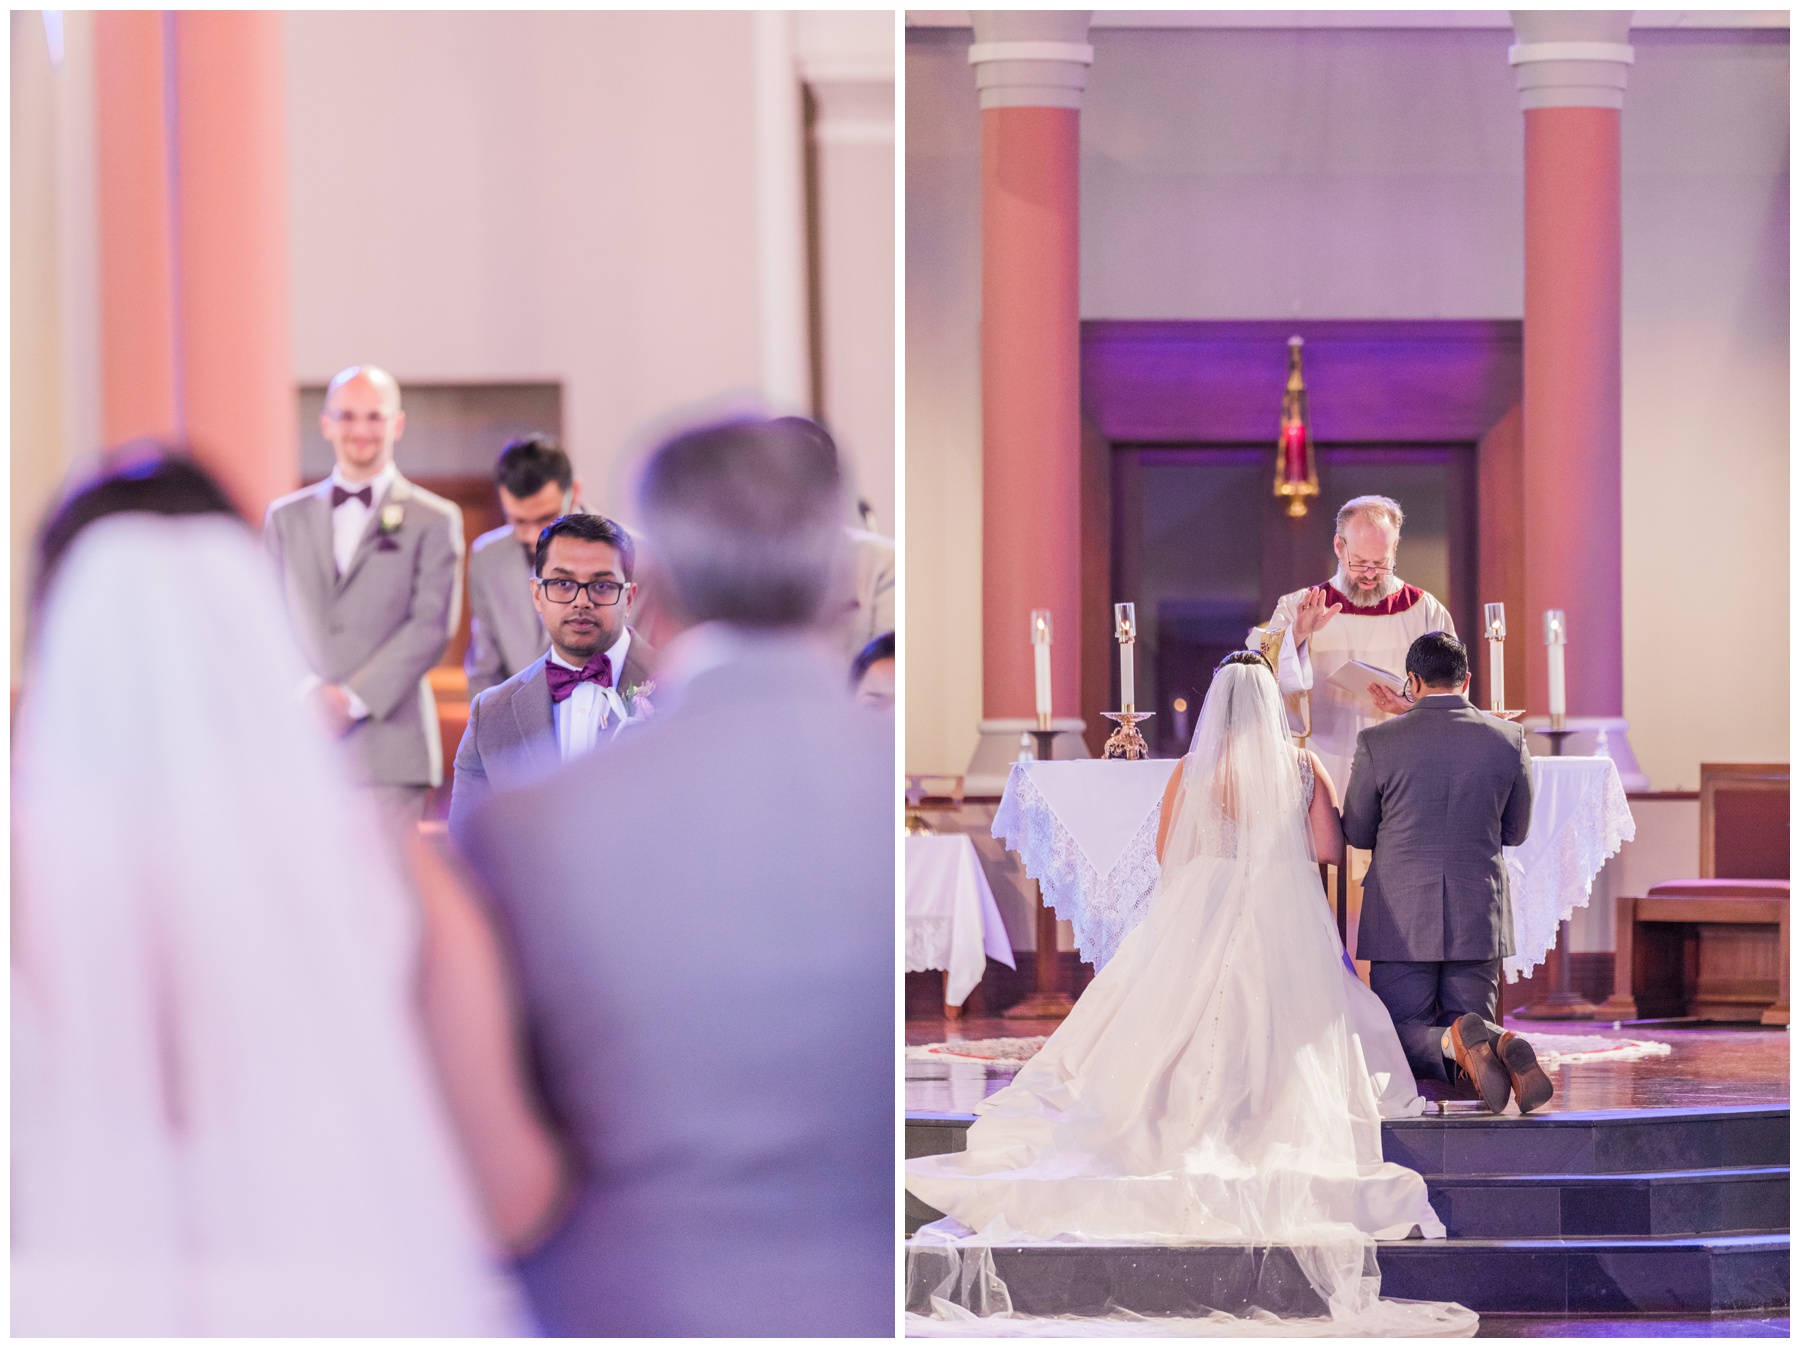 Multicultural wedding Mass in Texas